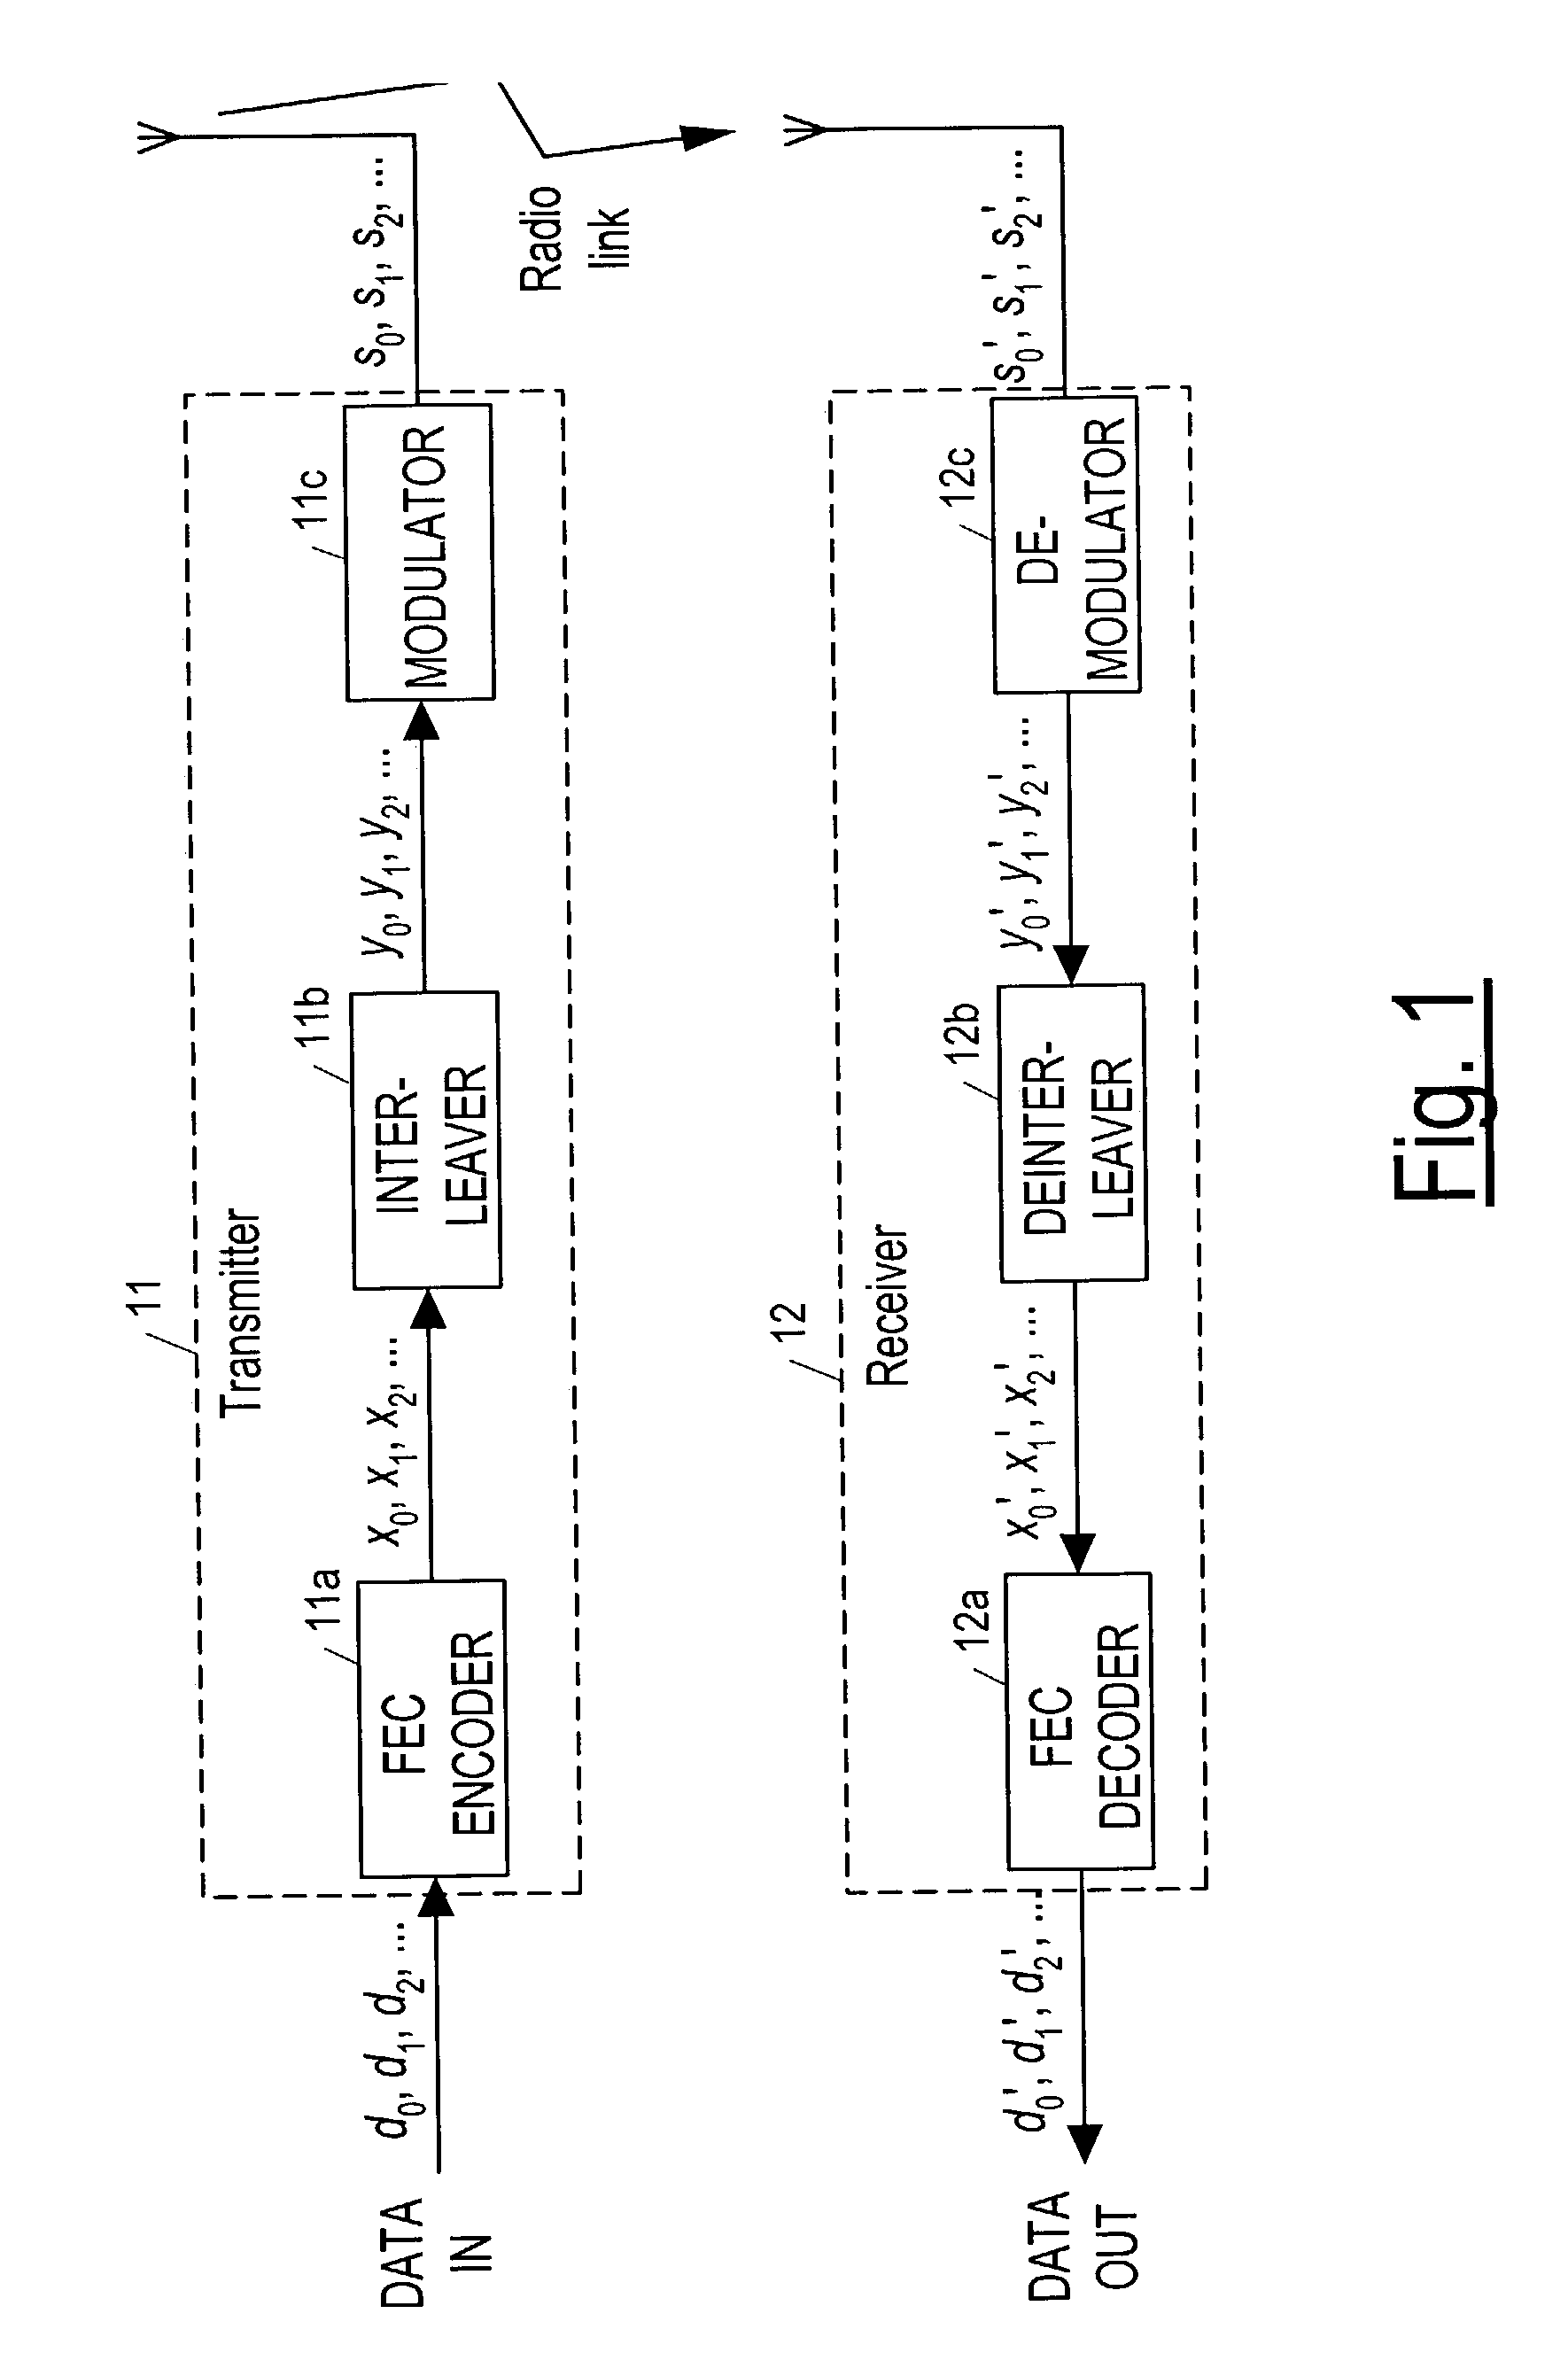 Partially filling block interleaver for a communication system